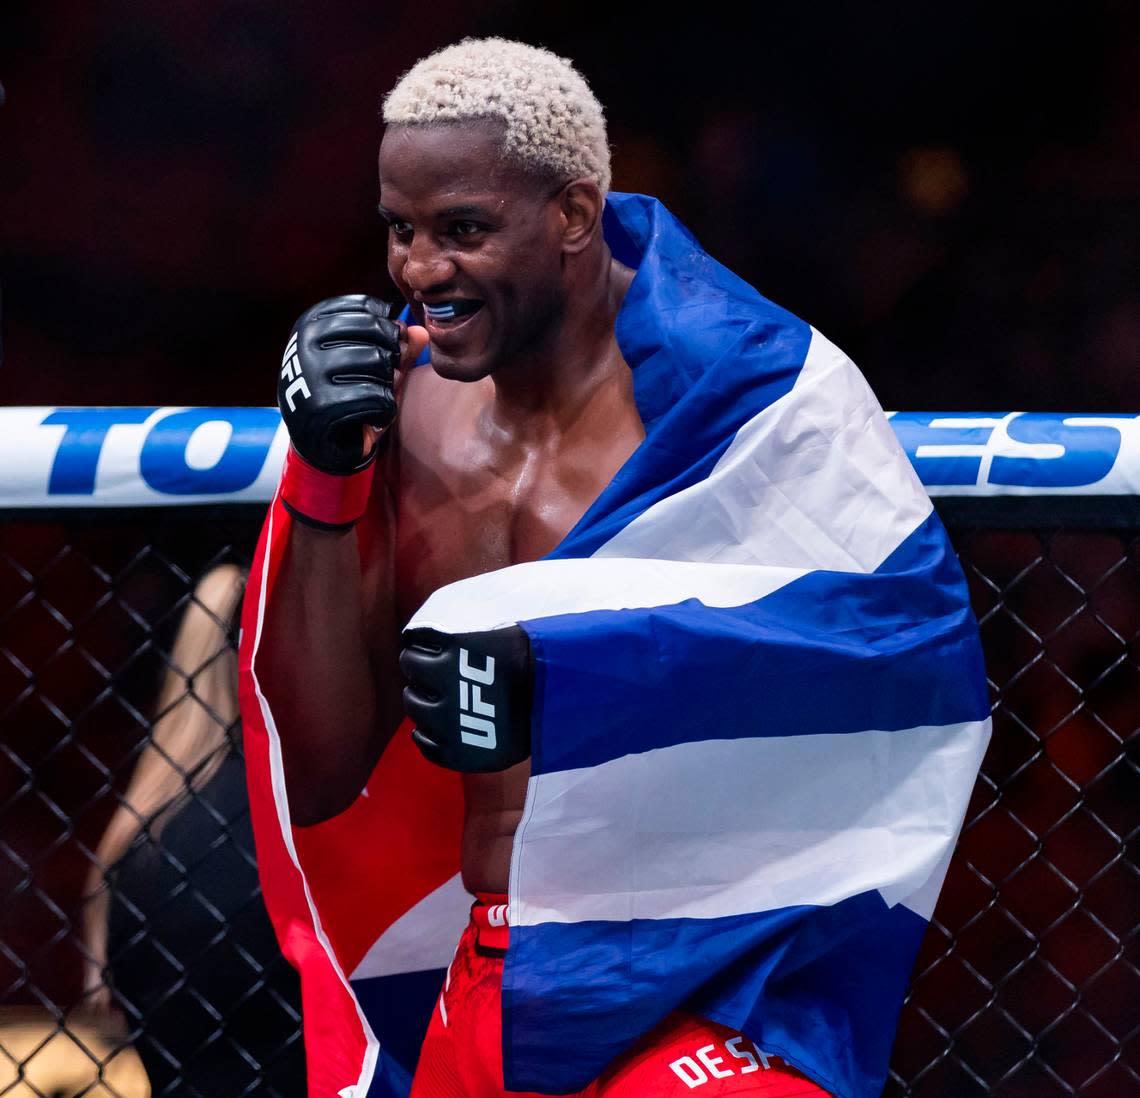 Robelis Despaigne from Cuba reacts after defeating Josh Parisian of the United States during their heavyweight title match during the UFC 299 event at the Kaseya Center on Saturday, March 9, 2024, in downtown Miami, Fla.